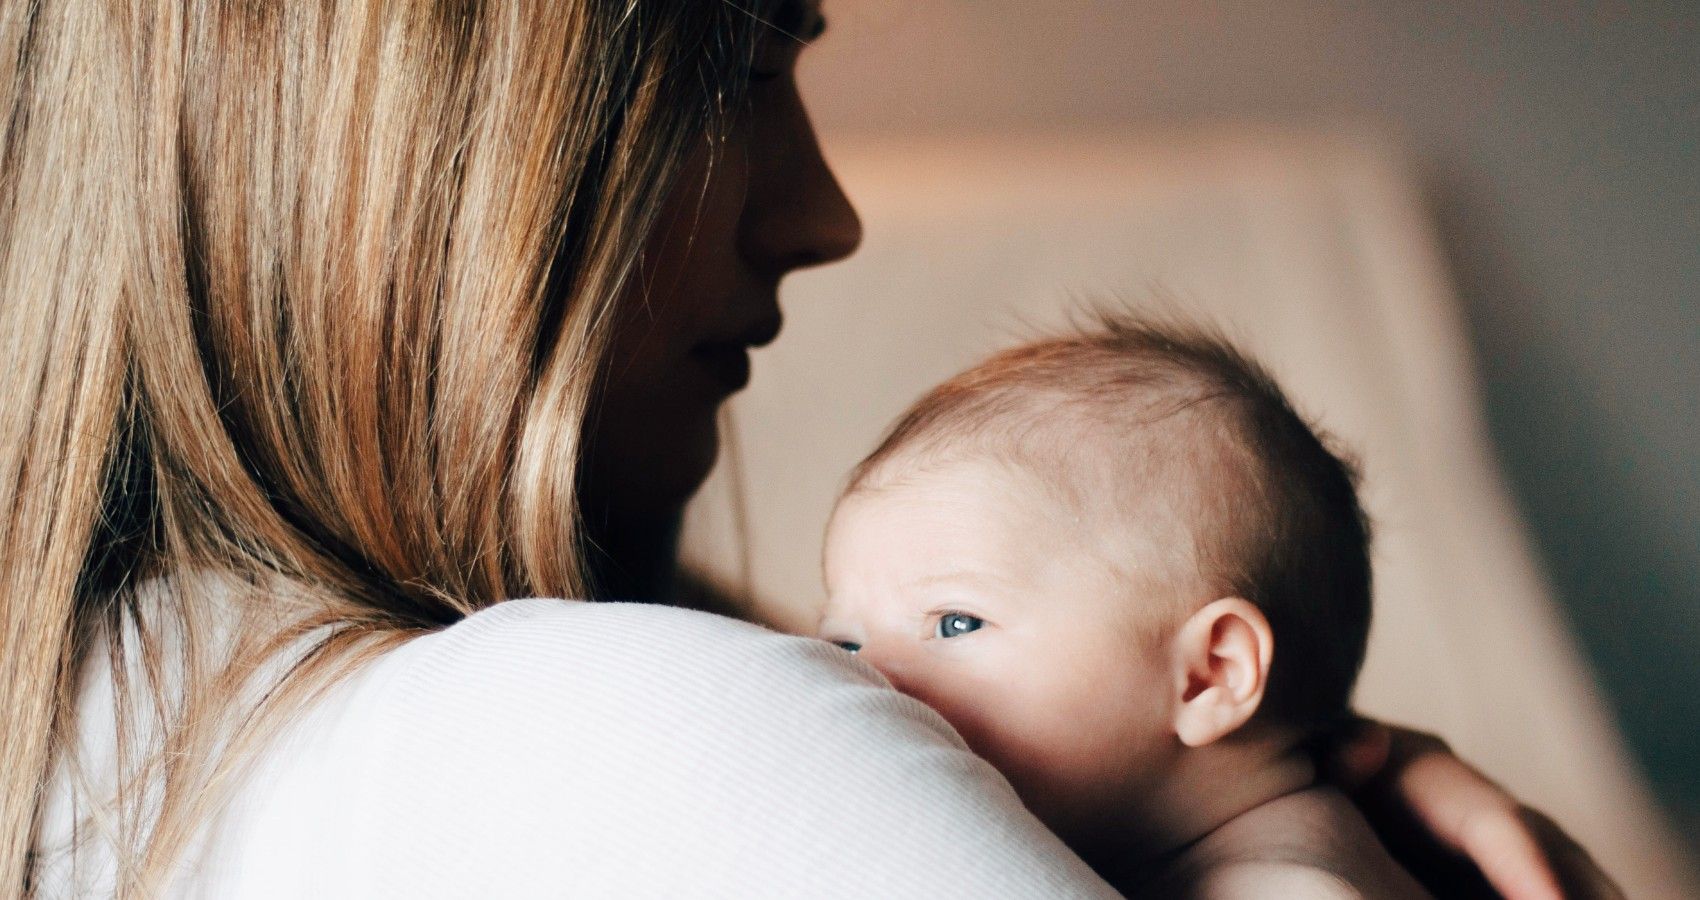 Babies More Likely To Accept A Stranger When They Can Still Smell Their Mother, Study Finds